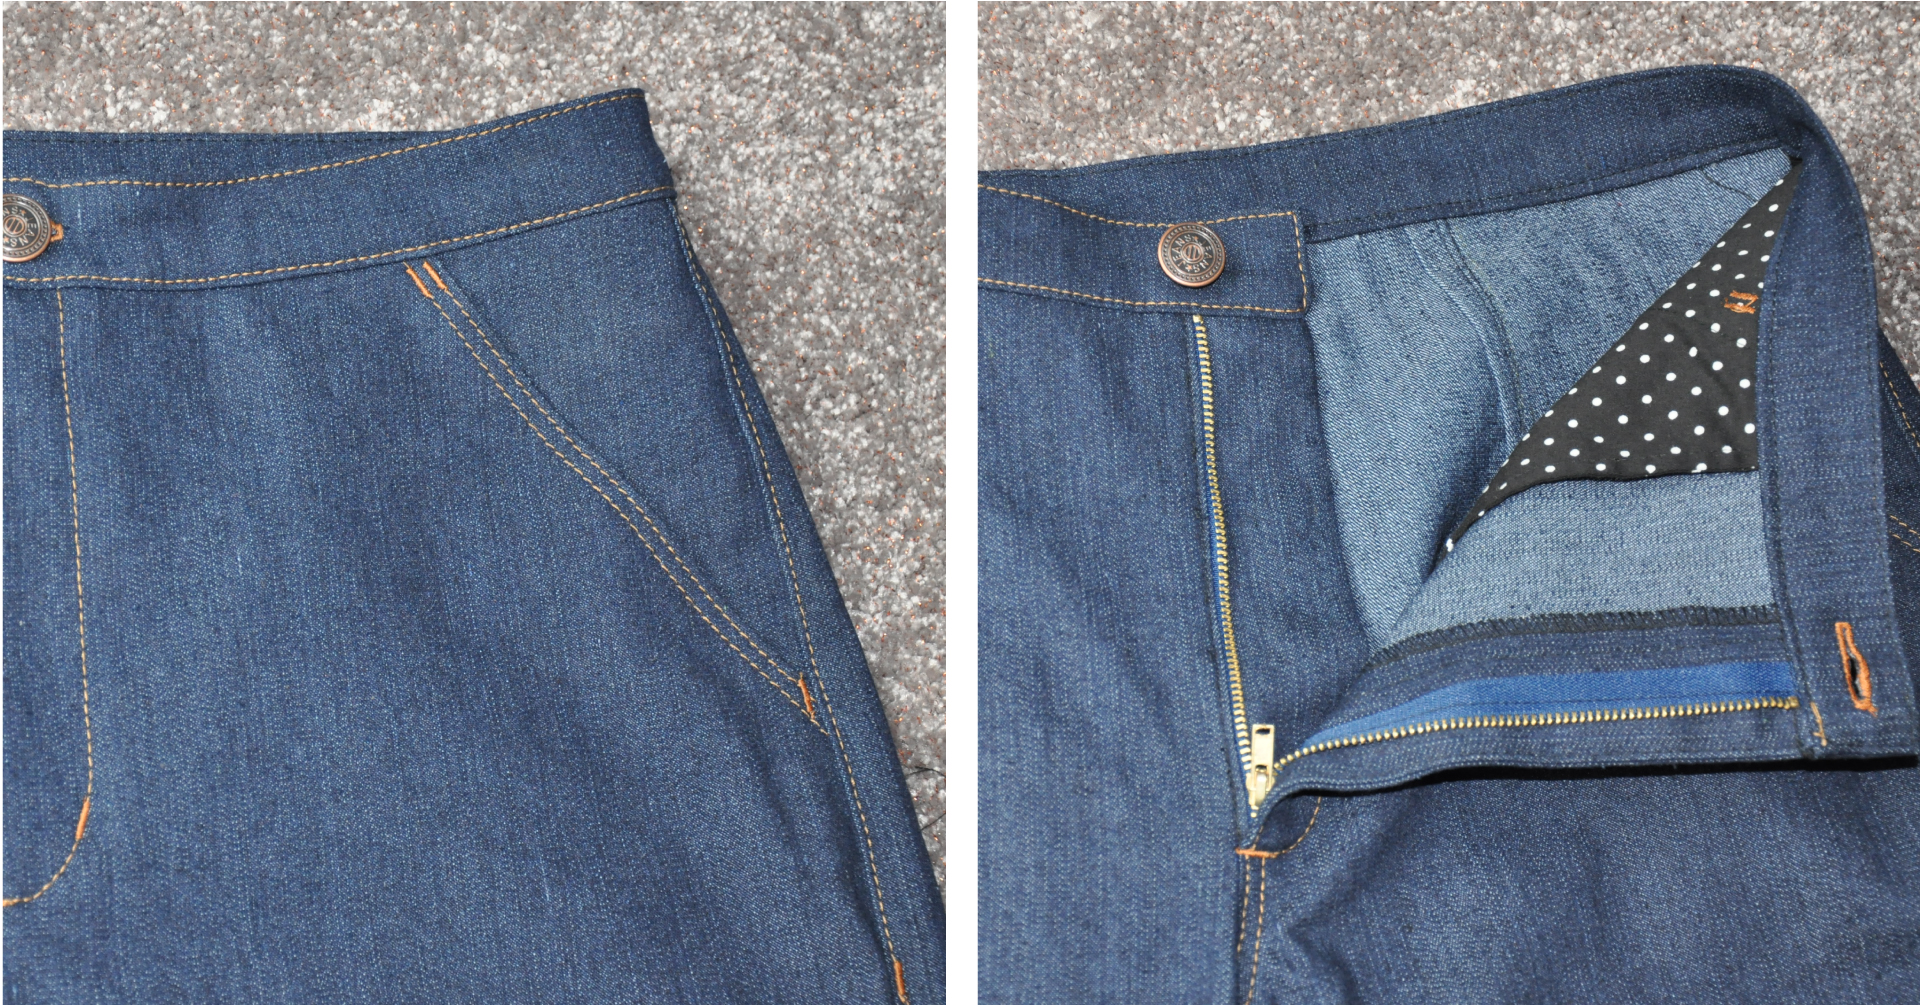 How to Sew Pockets with a Concealed Side Opening